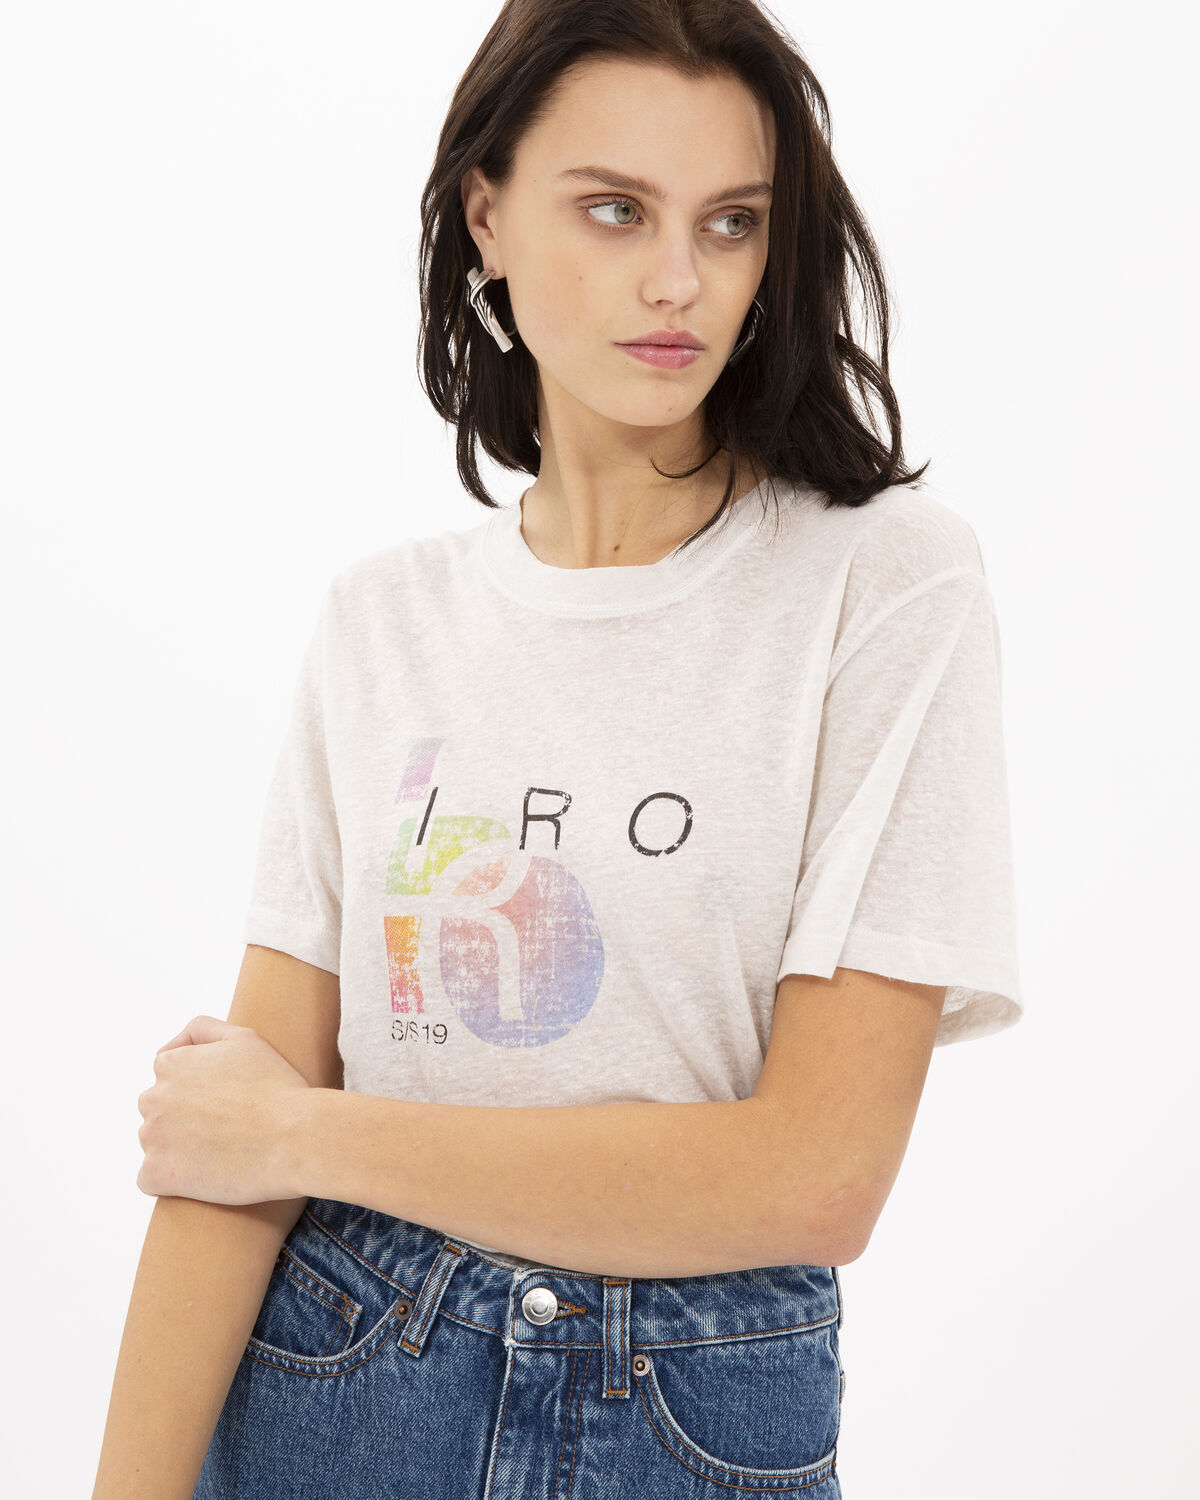 Photo of IRO Paris Inspiring T-Shirt Light Grey - This Top Is Distinguished By Its Transparency And iro Screen Printing. Wear It With A Jean Skirt And A Pair Of Boots For A Modern Look. T-Shirts